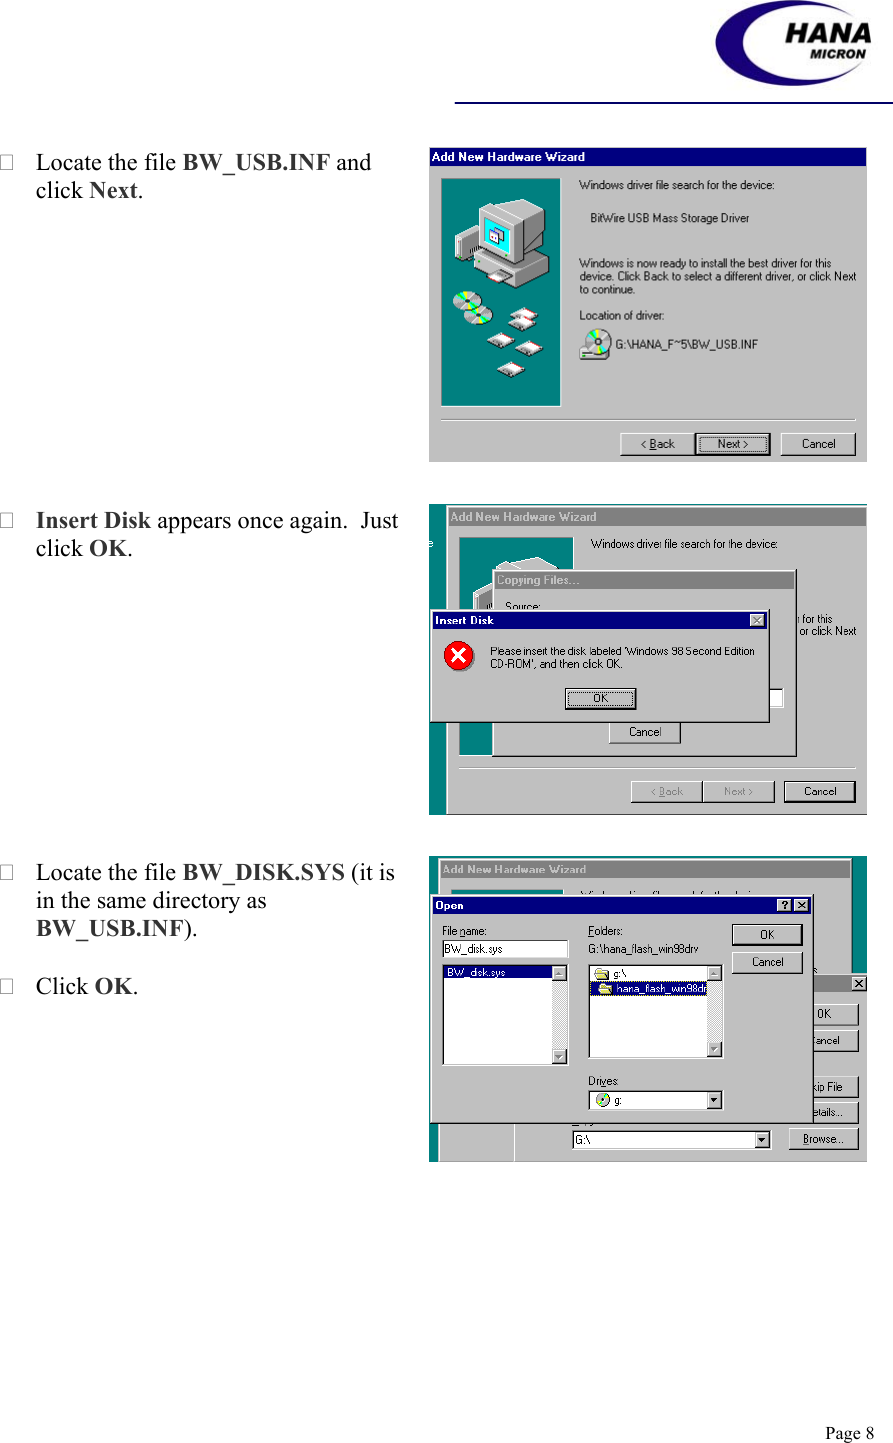    Page 8  Locate the file BW_USB.INF and click Next.   Insert Disk appears once again.  Just click OK.   Locate the file BW_DISK.SYS (it is in the same directory as BW_USB.INF).   Click OK.  